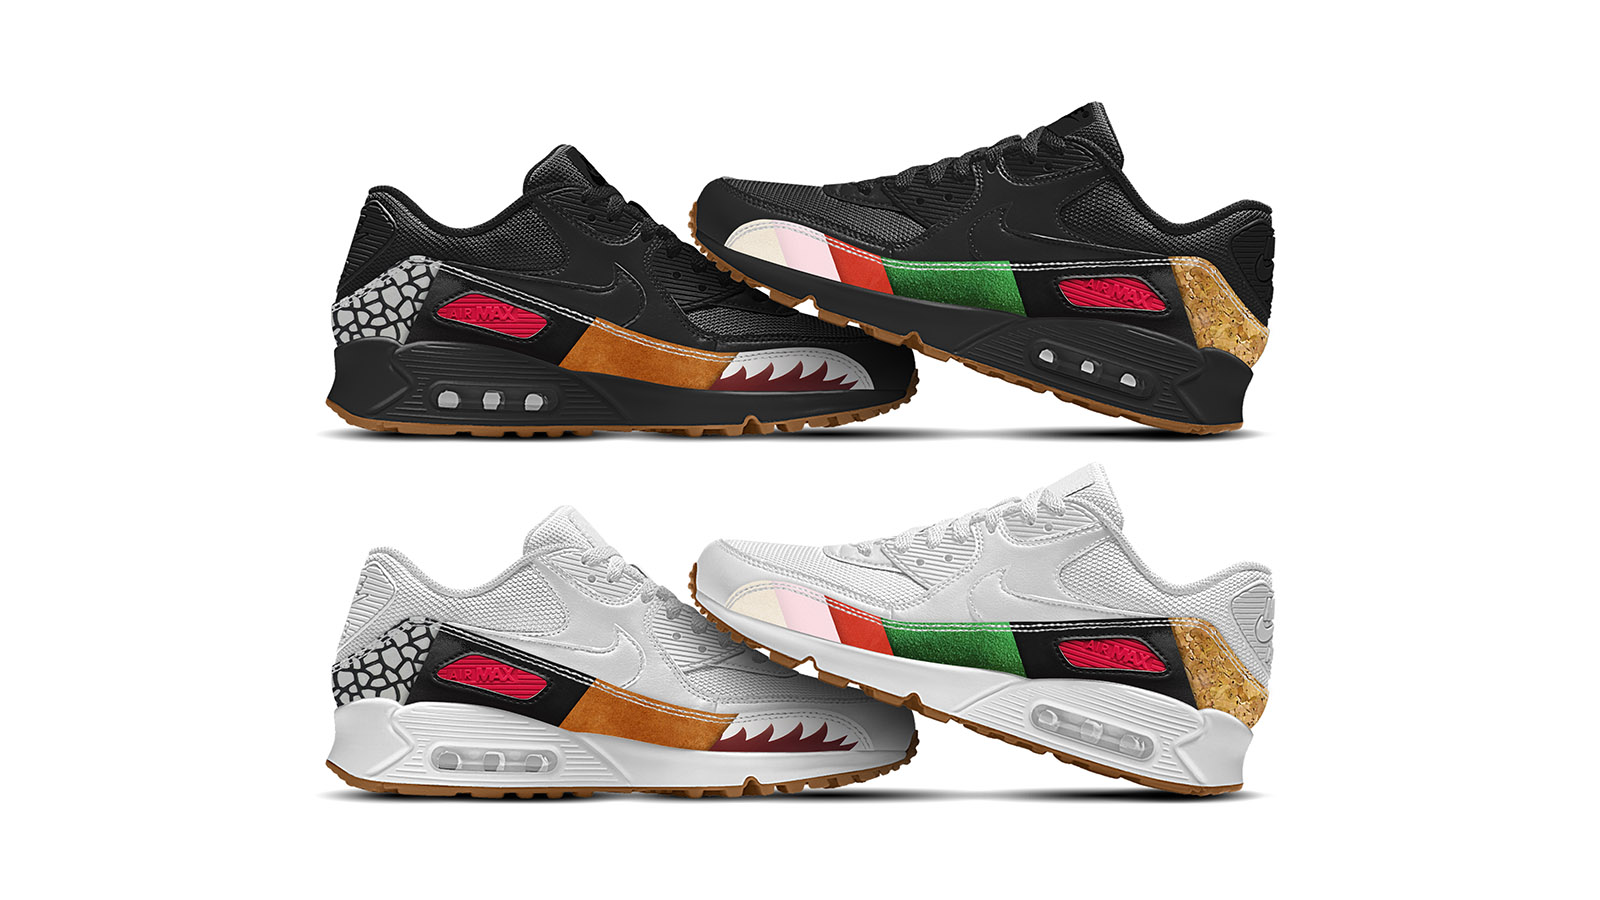 Nike Air Max 90 "Master" Imagined by Graphic Designer | Nice